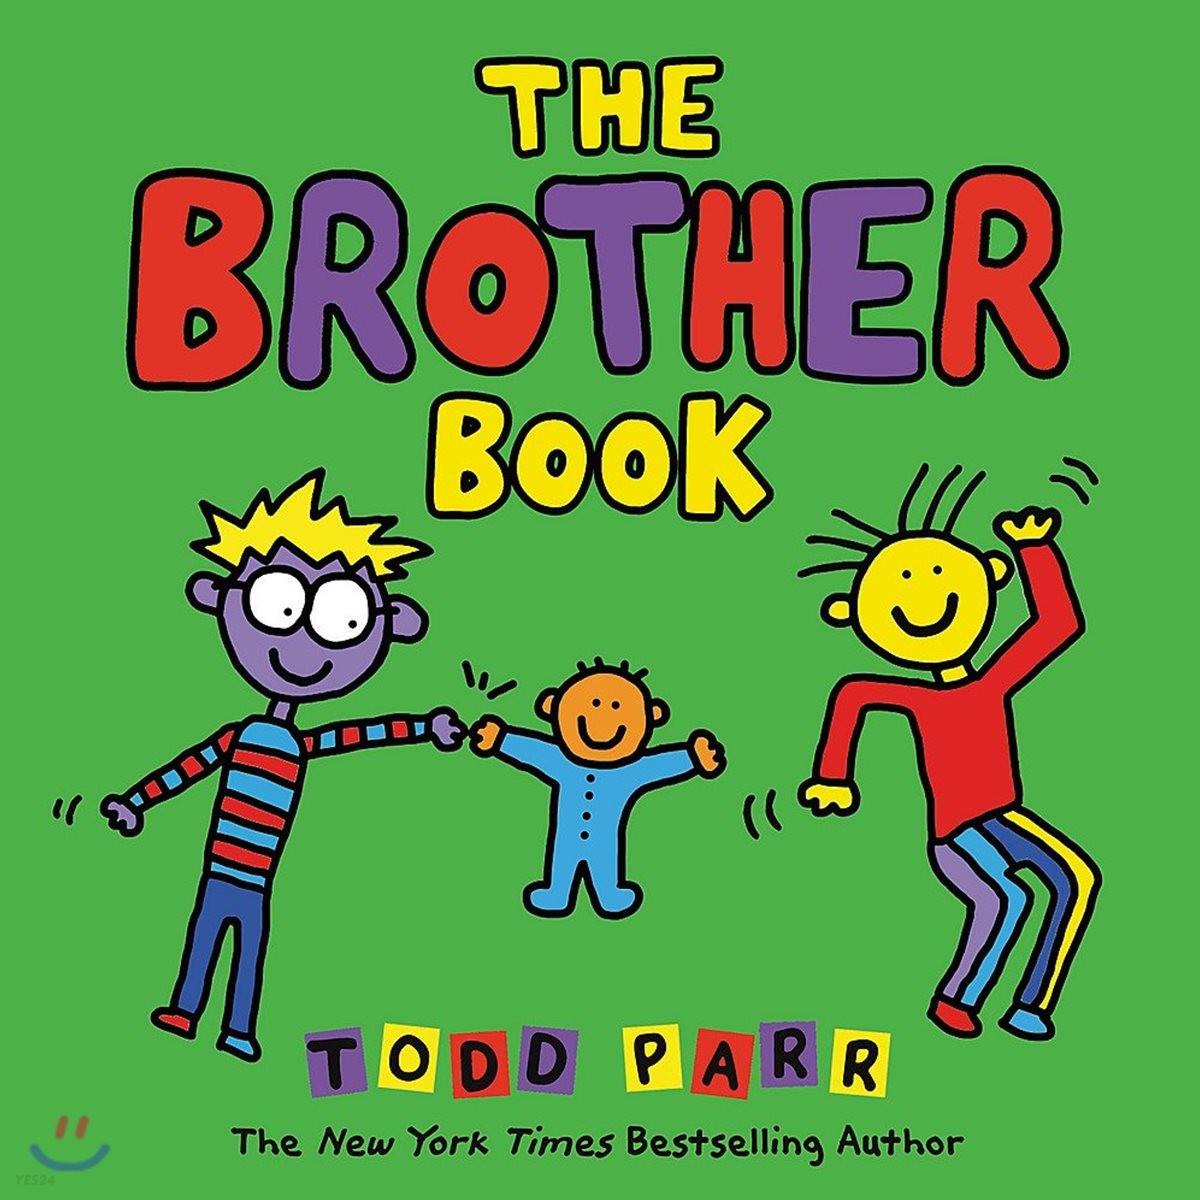 (The)brother book